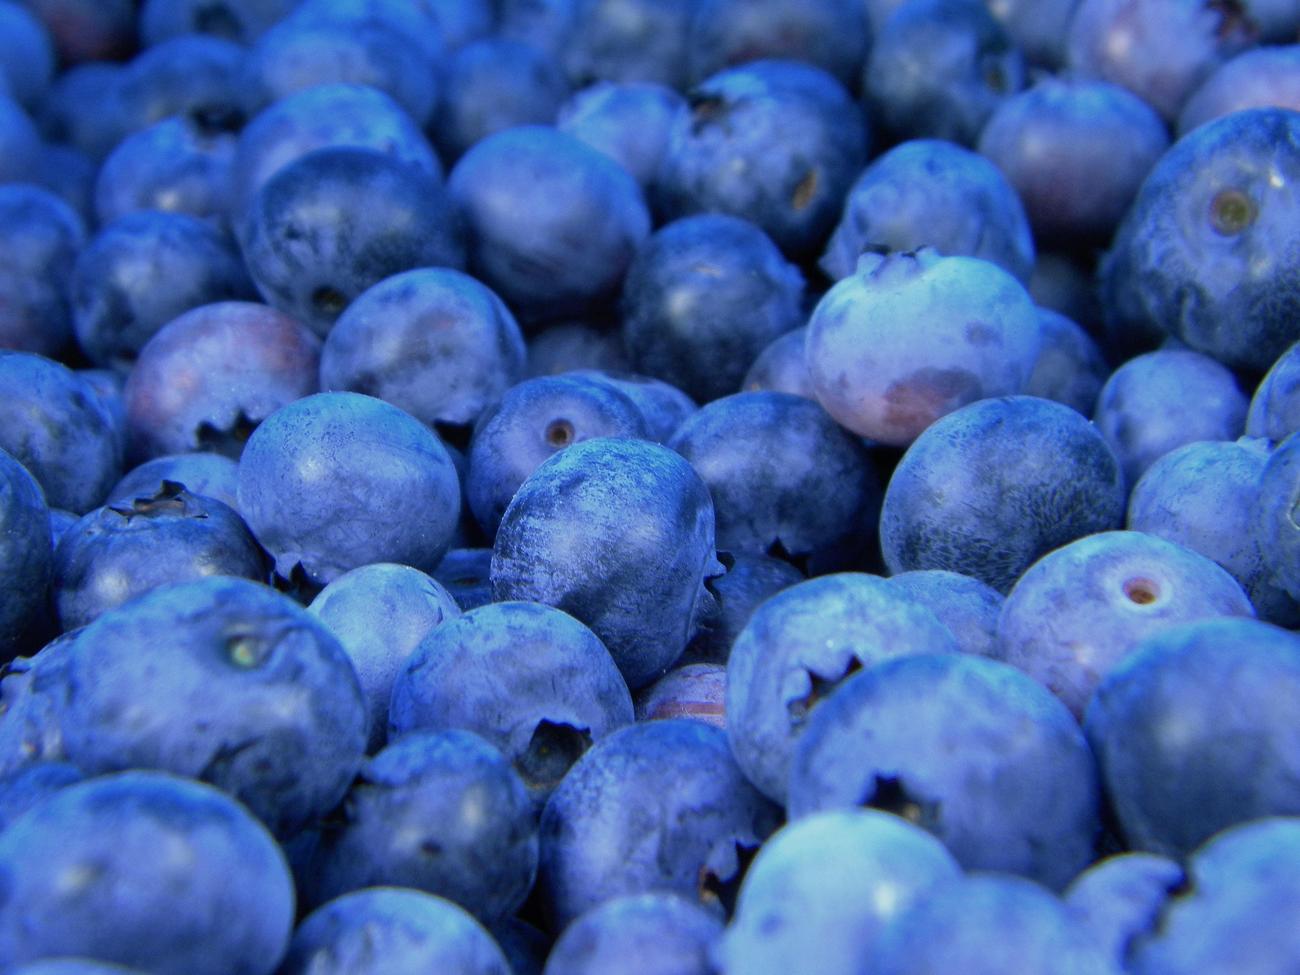 health benefits of blueberries featured